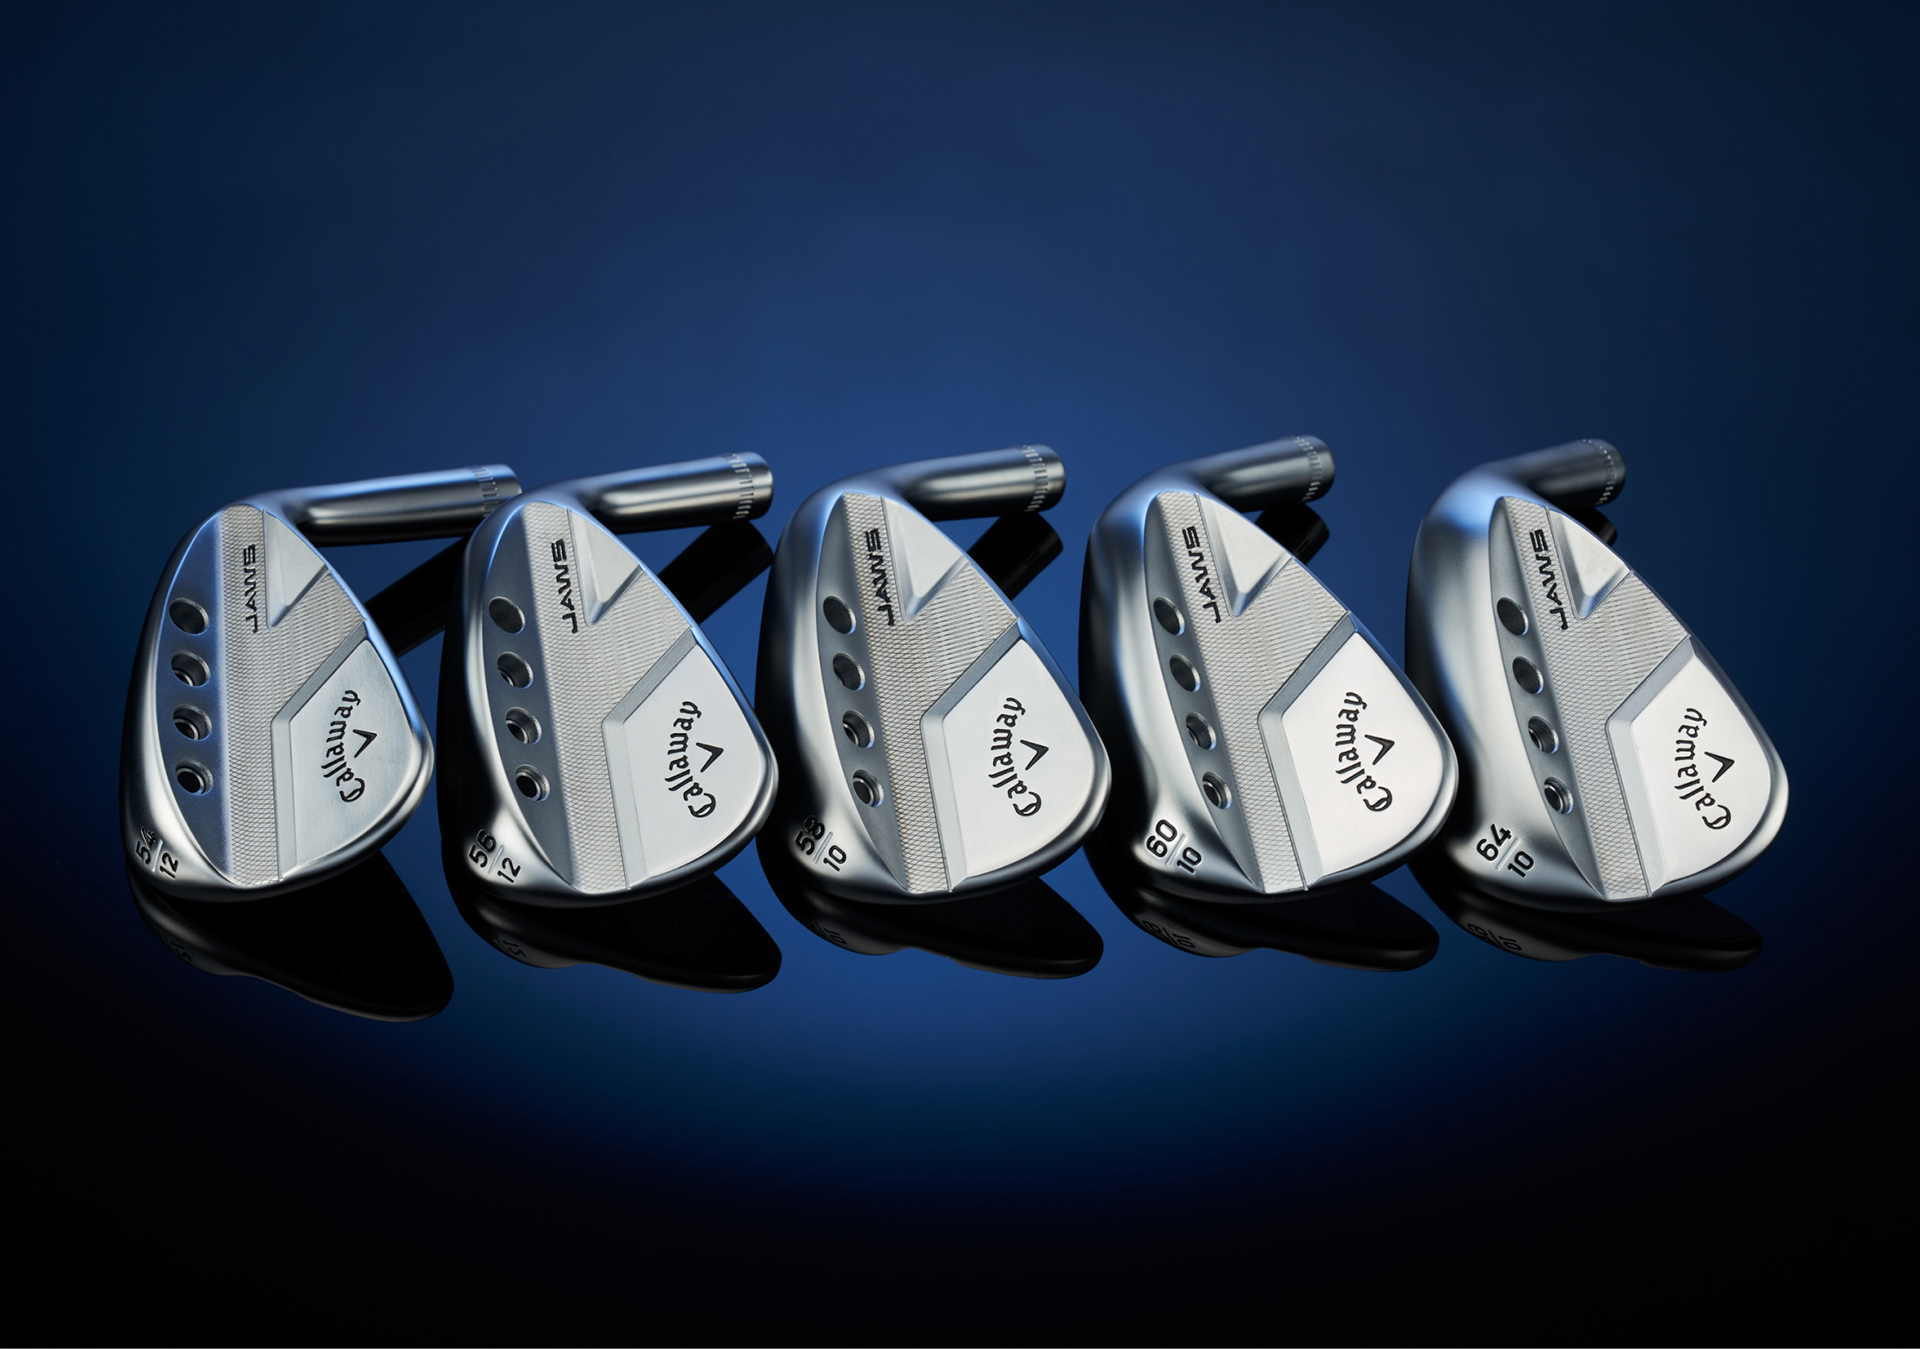 Callaway Golf’s new Jaws Toe Wedges